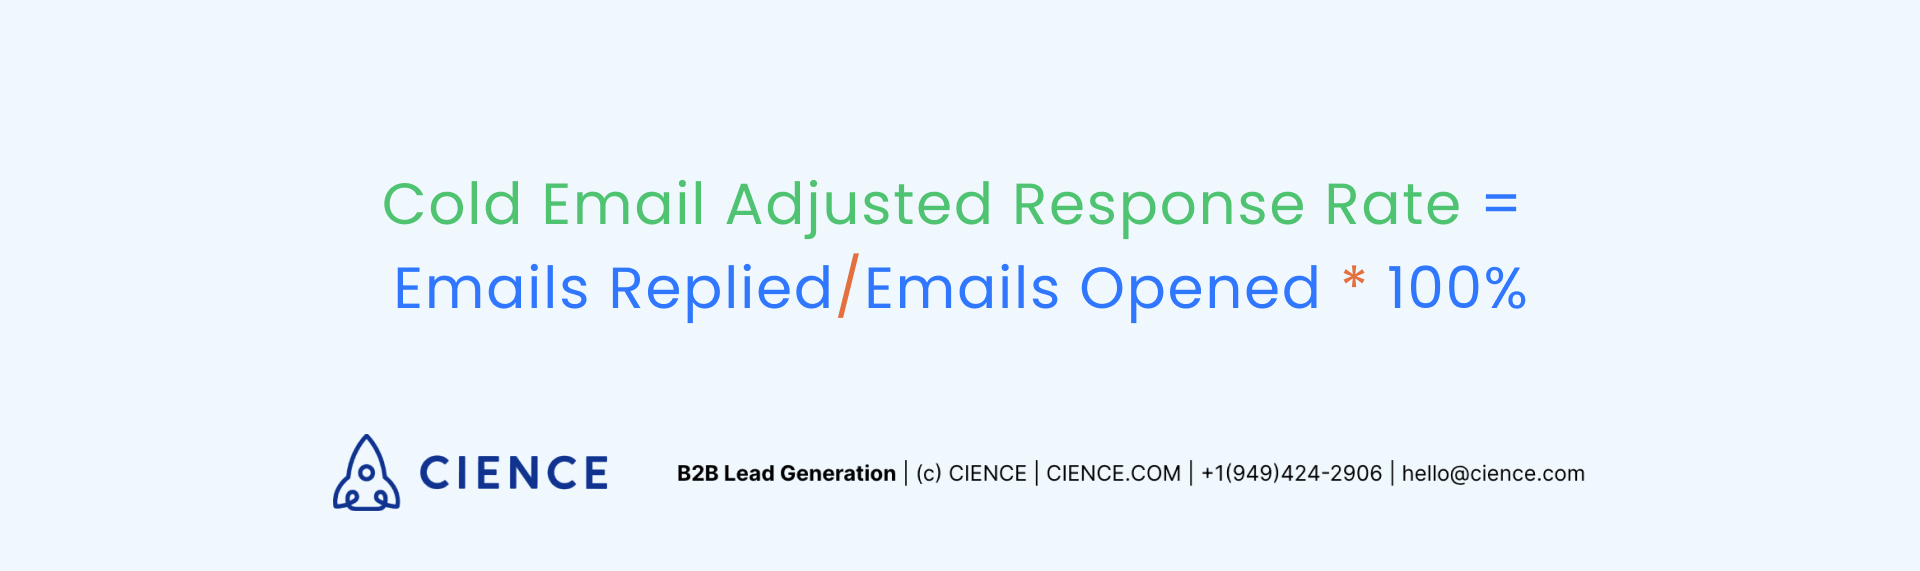 Cold Email Adjusted Response Rate Formula